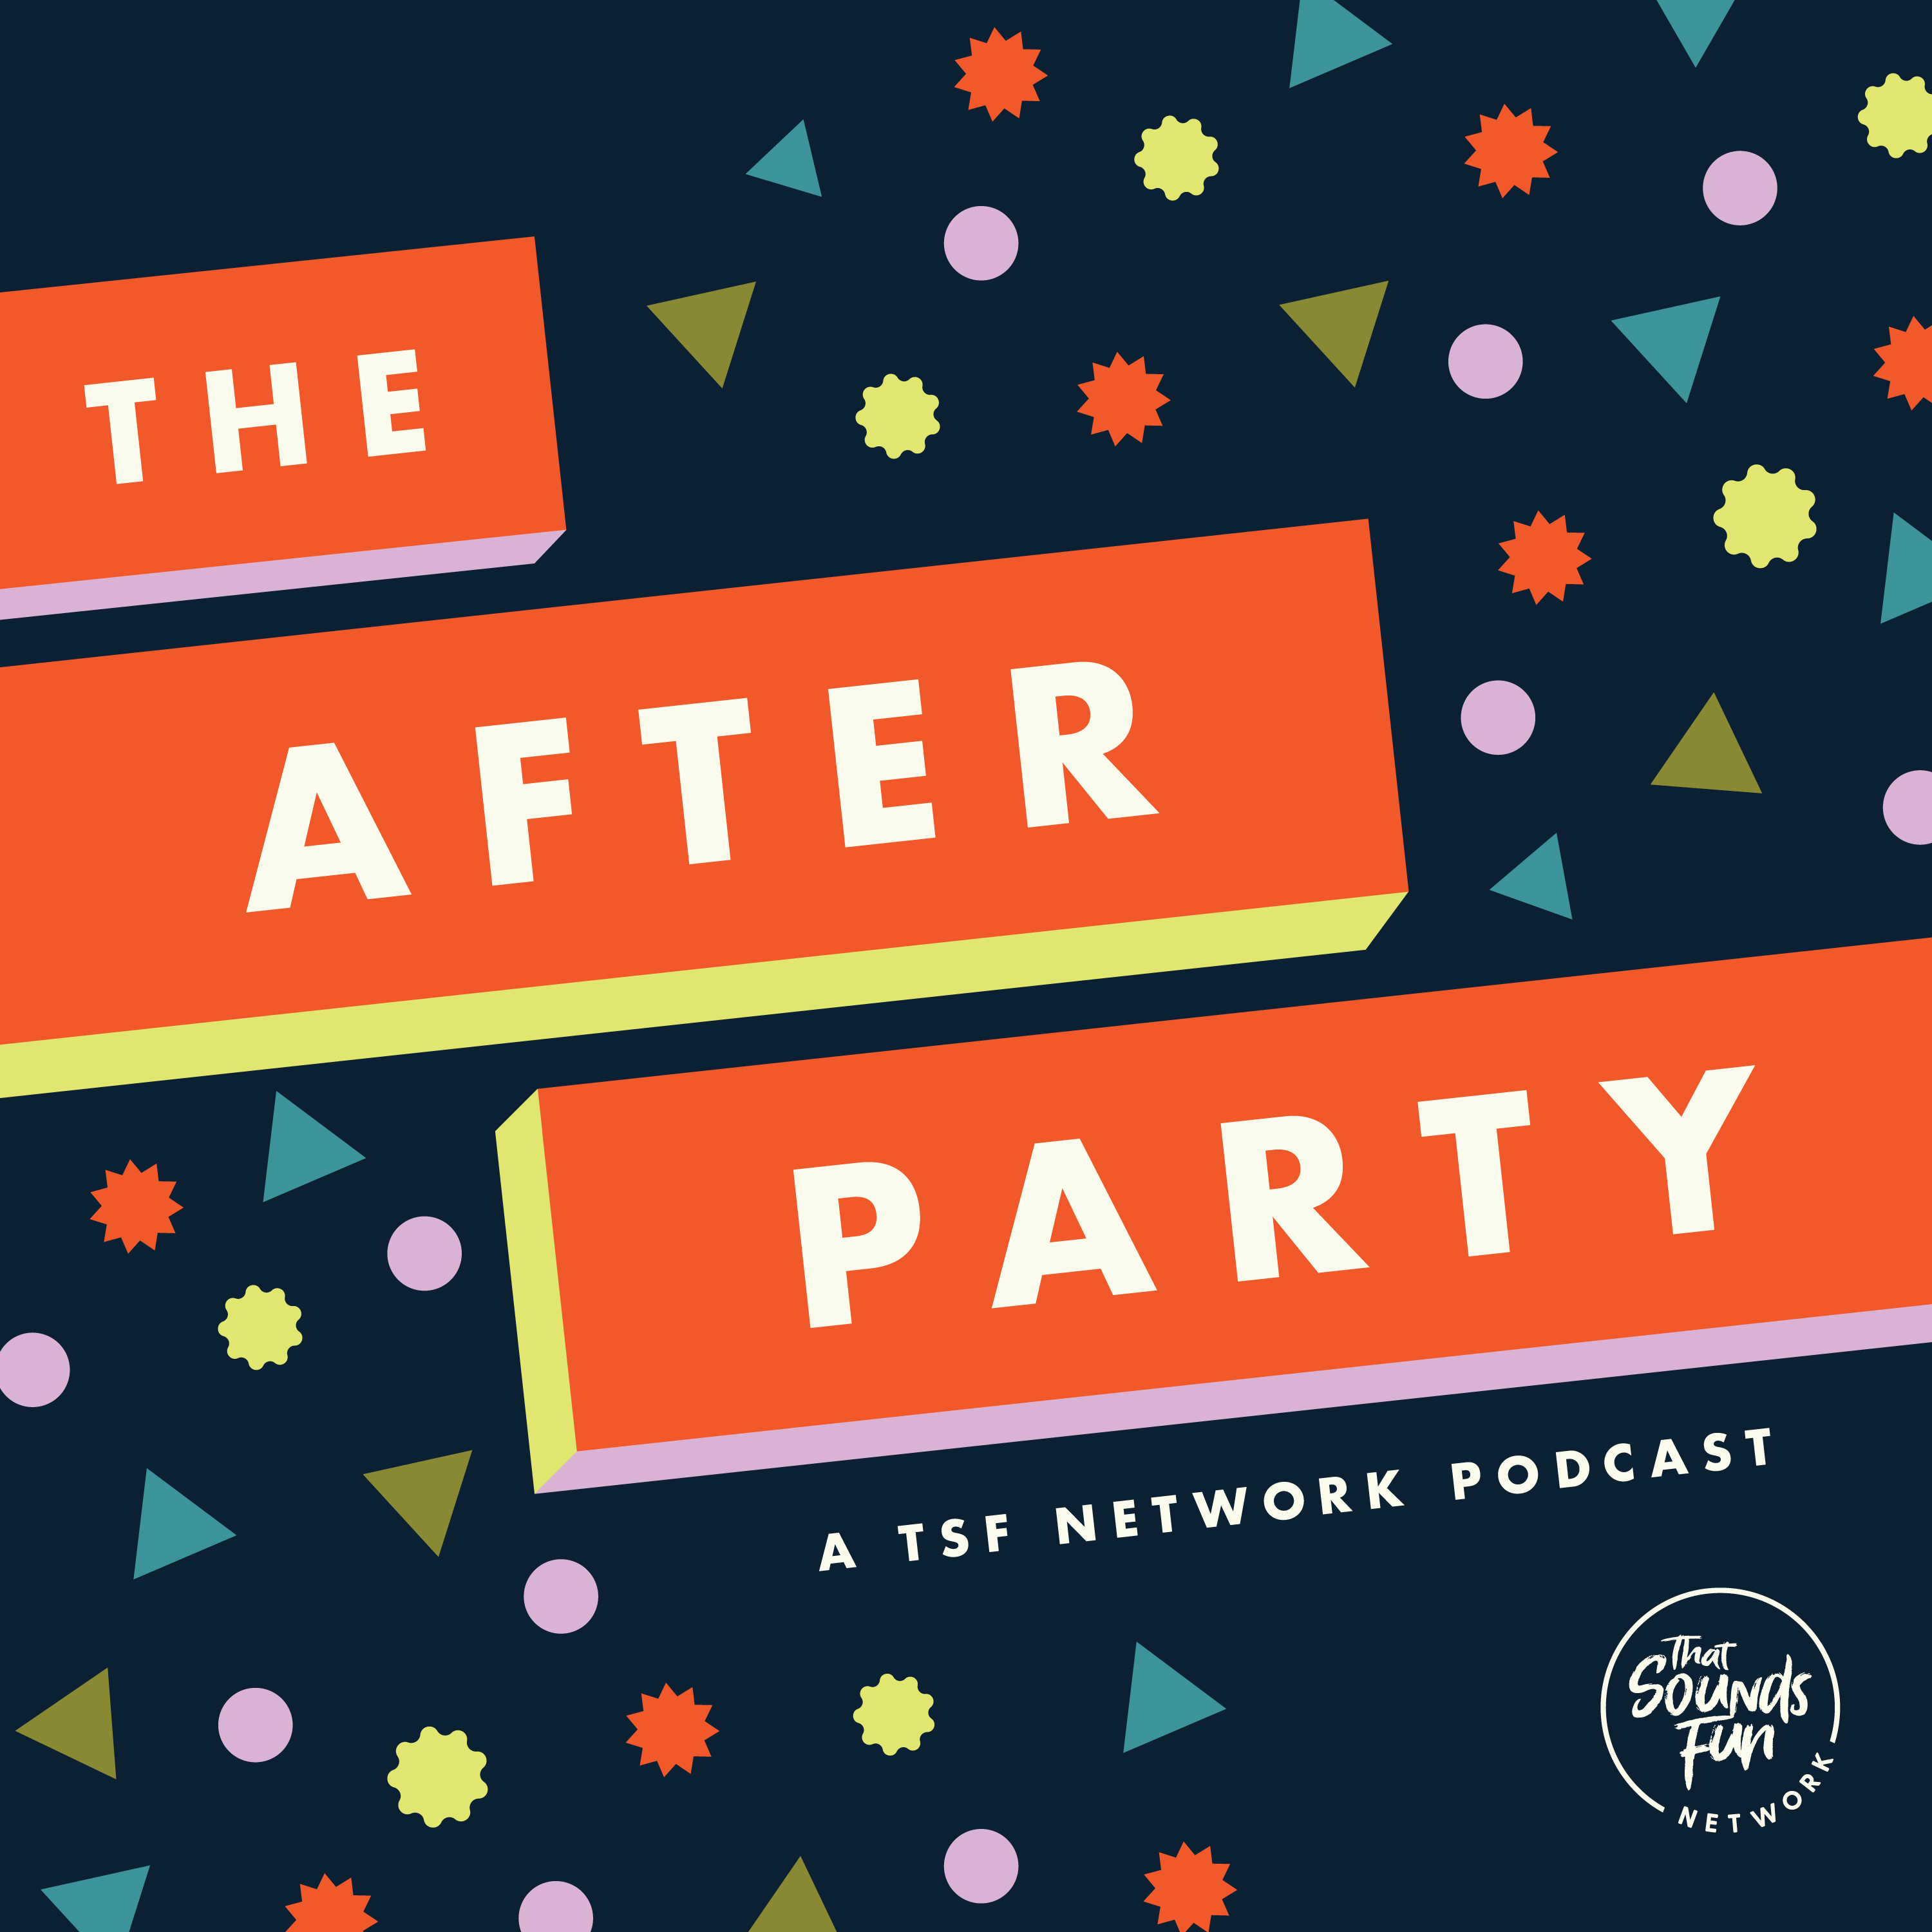 The After Party: A TSF Network Podcast